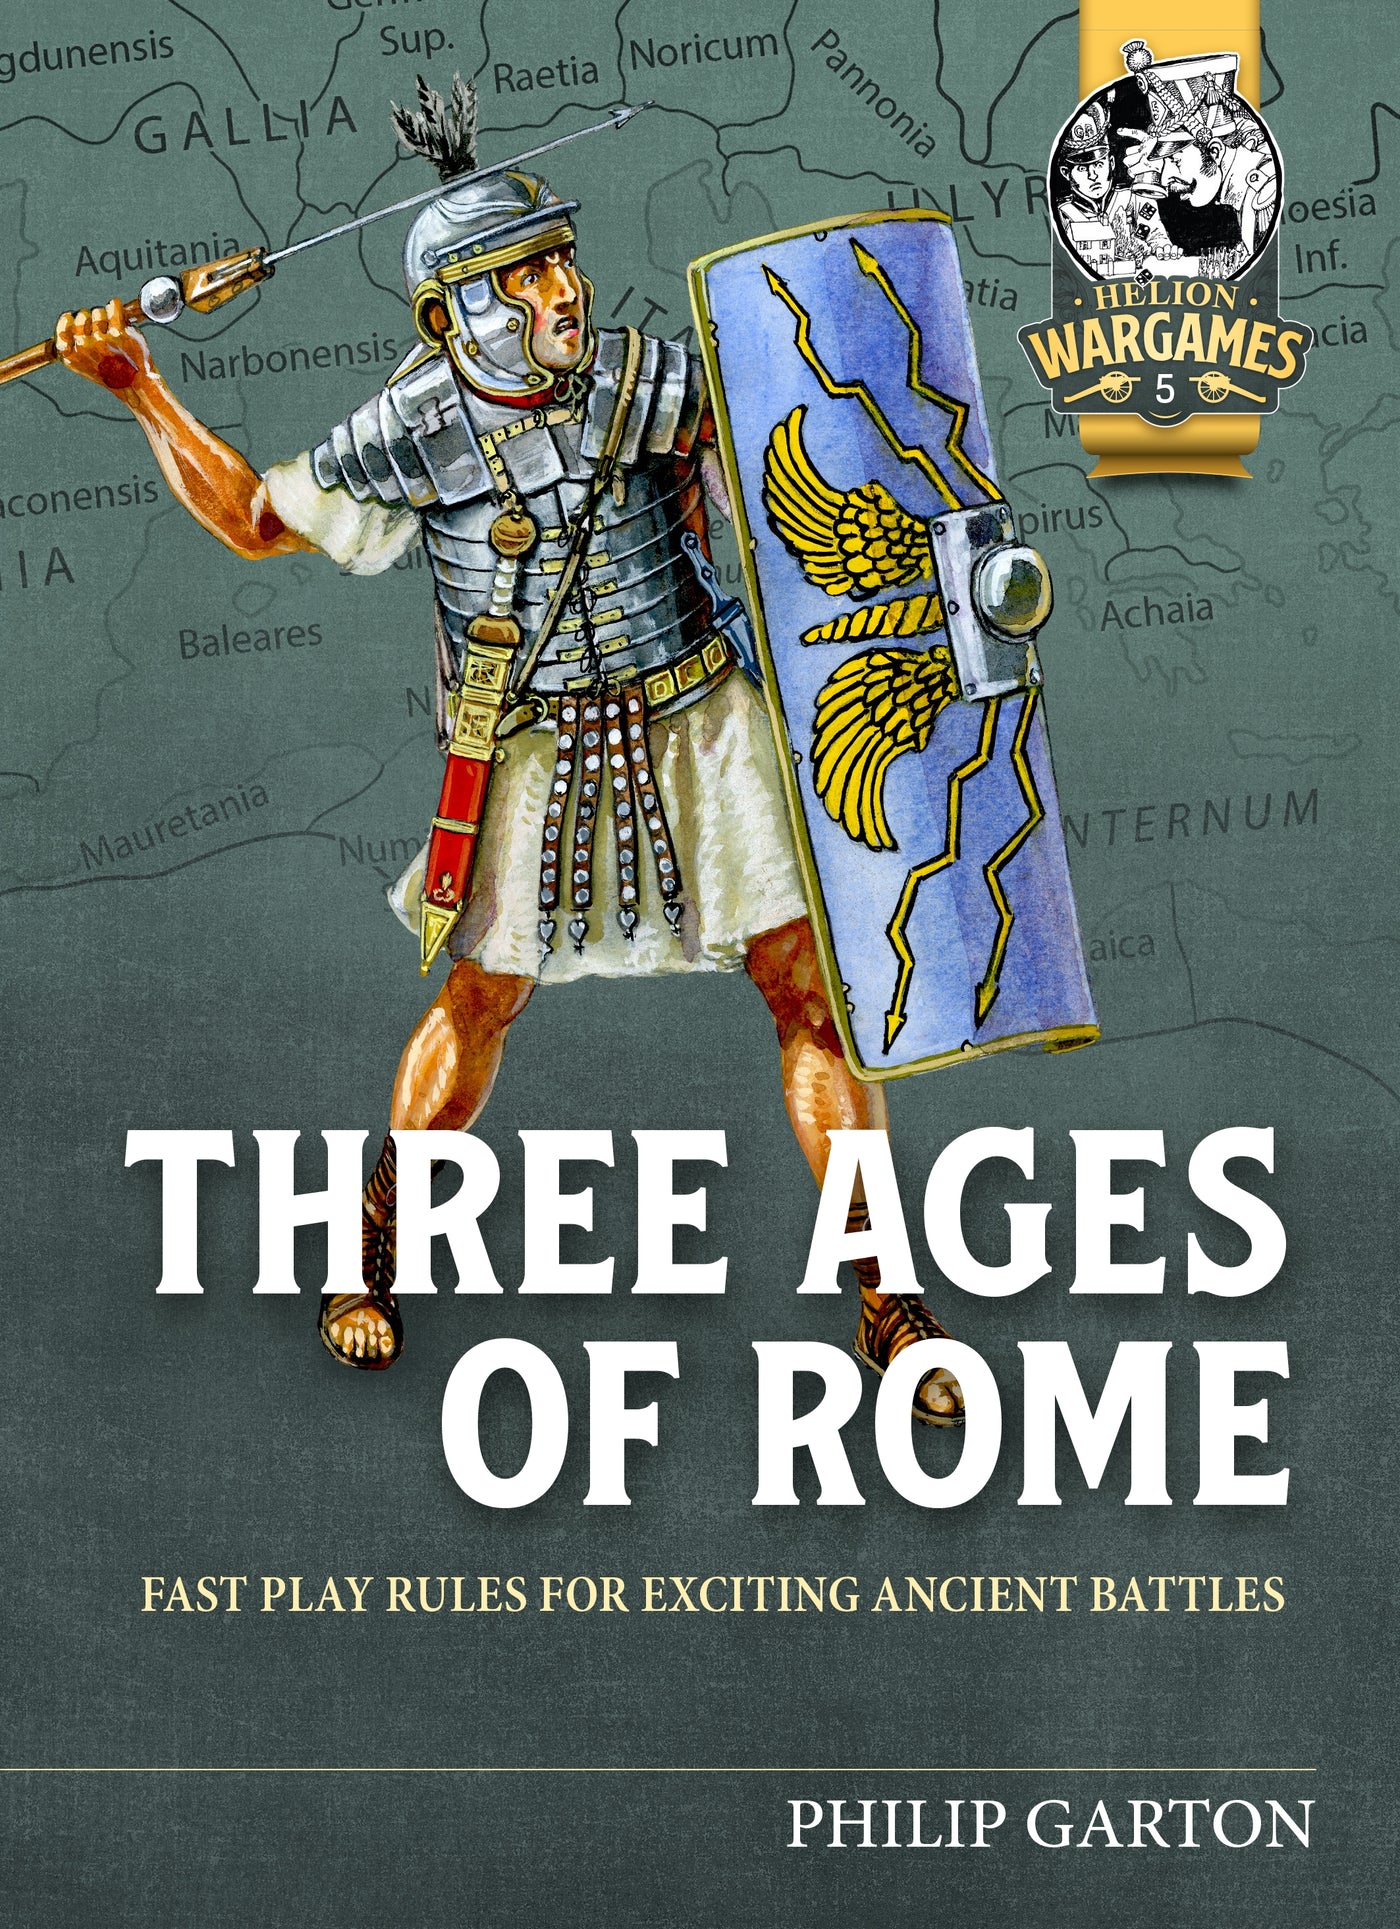 Three Ages of Rome